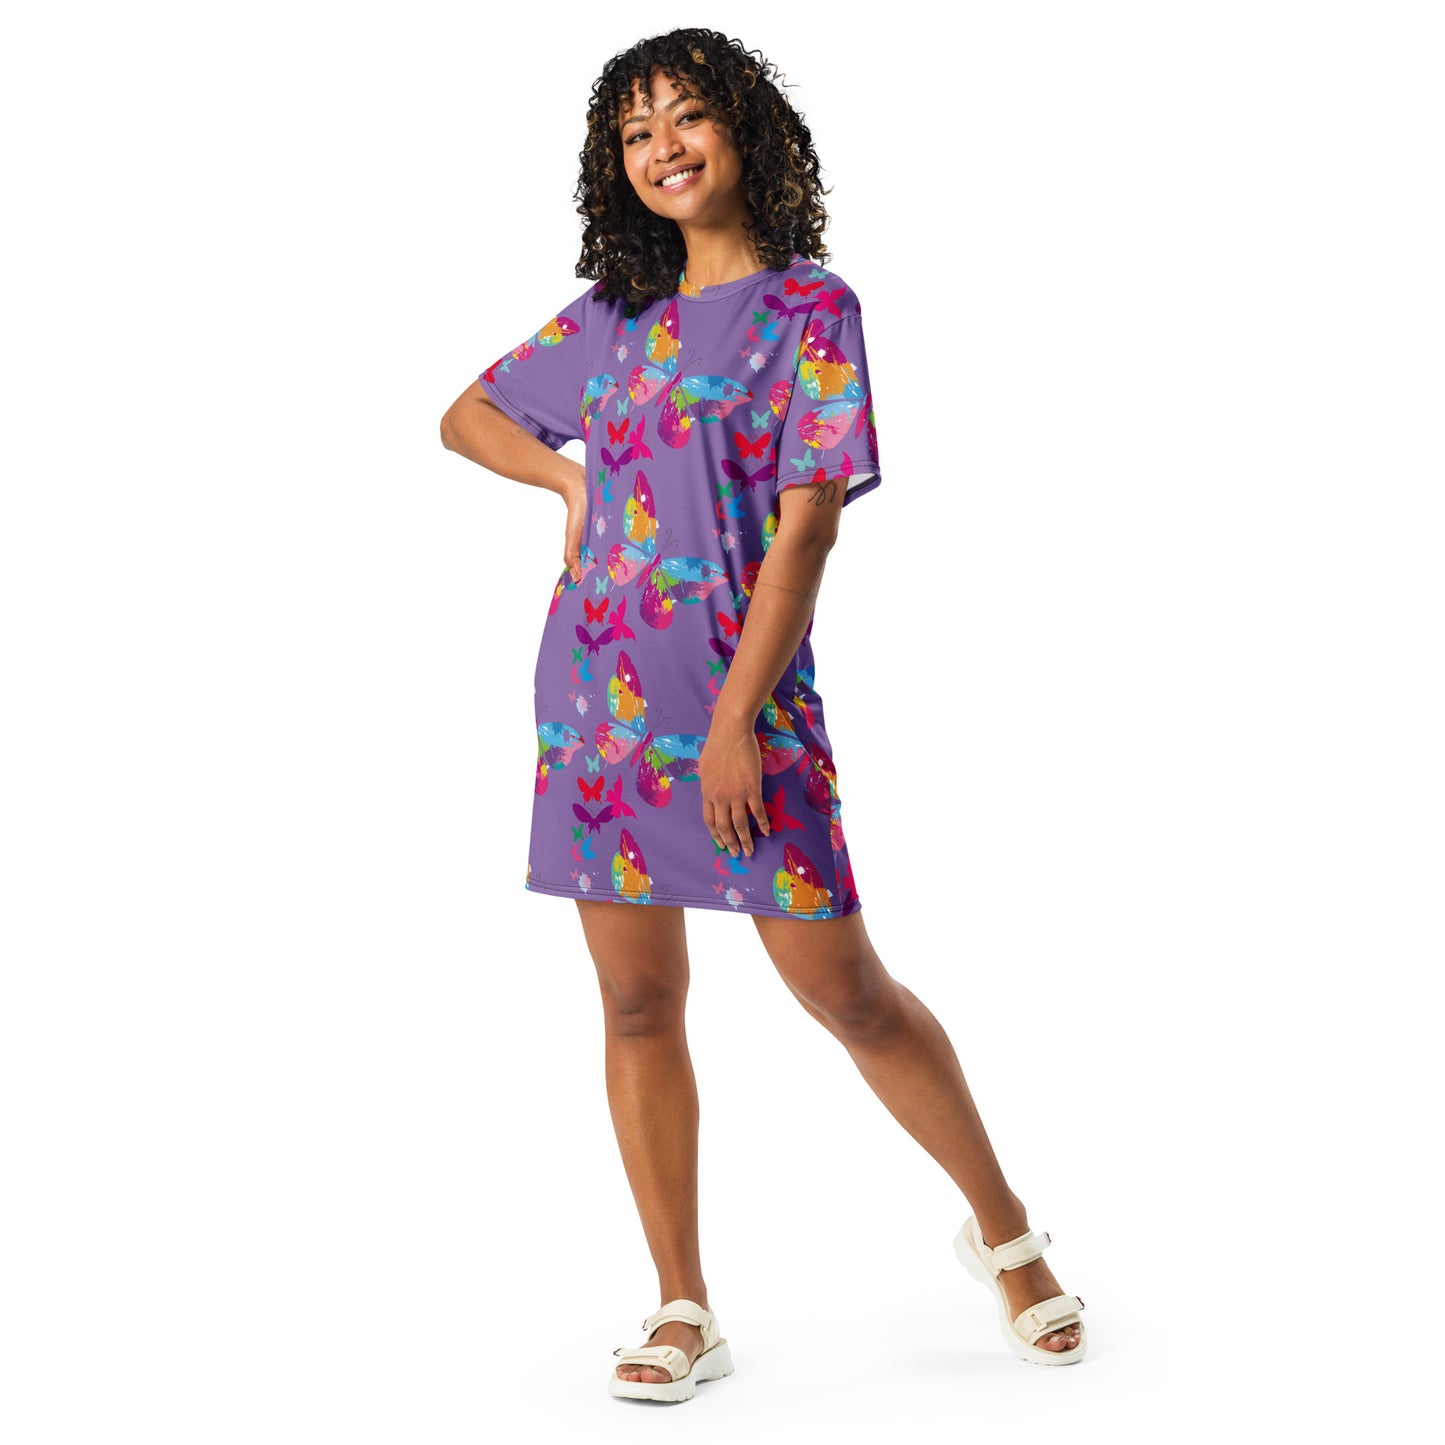 "510_Athletics" Colorful "Butterfly Kisses" T-shirt dress